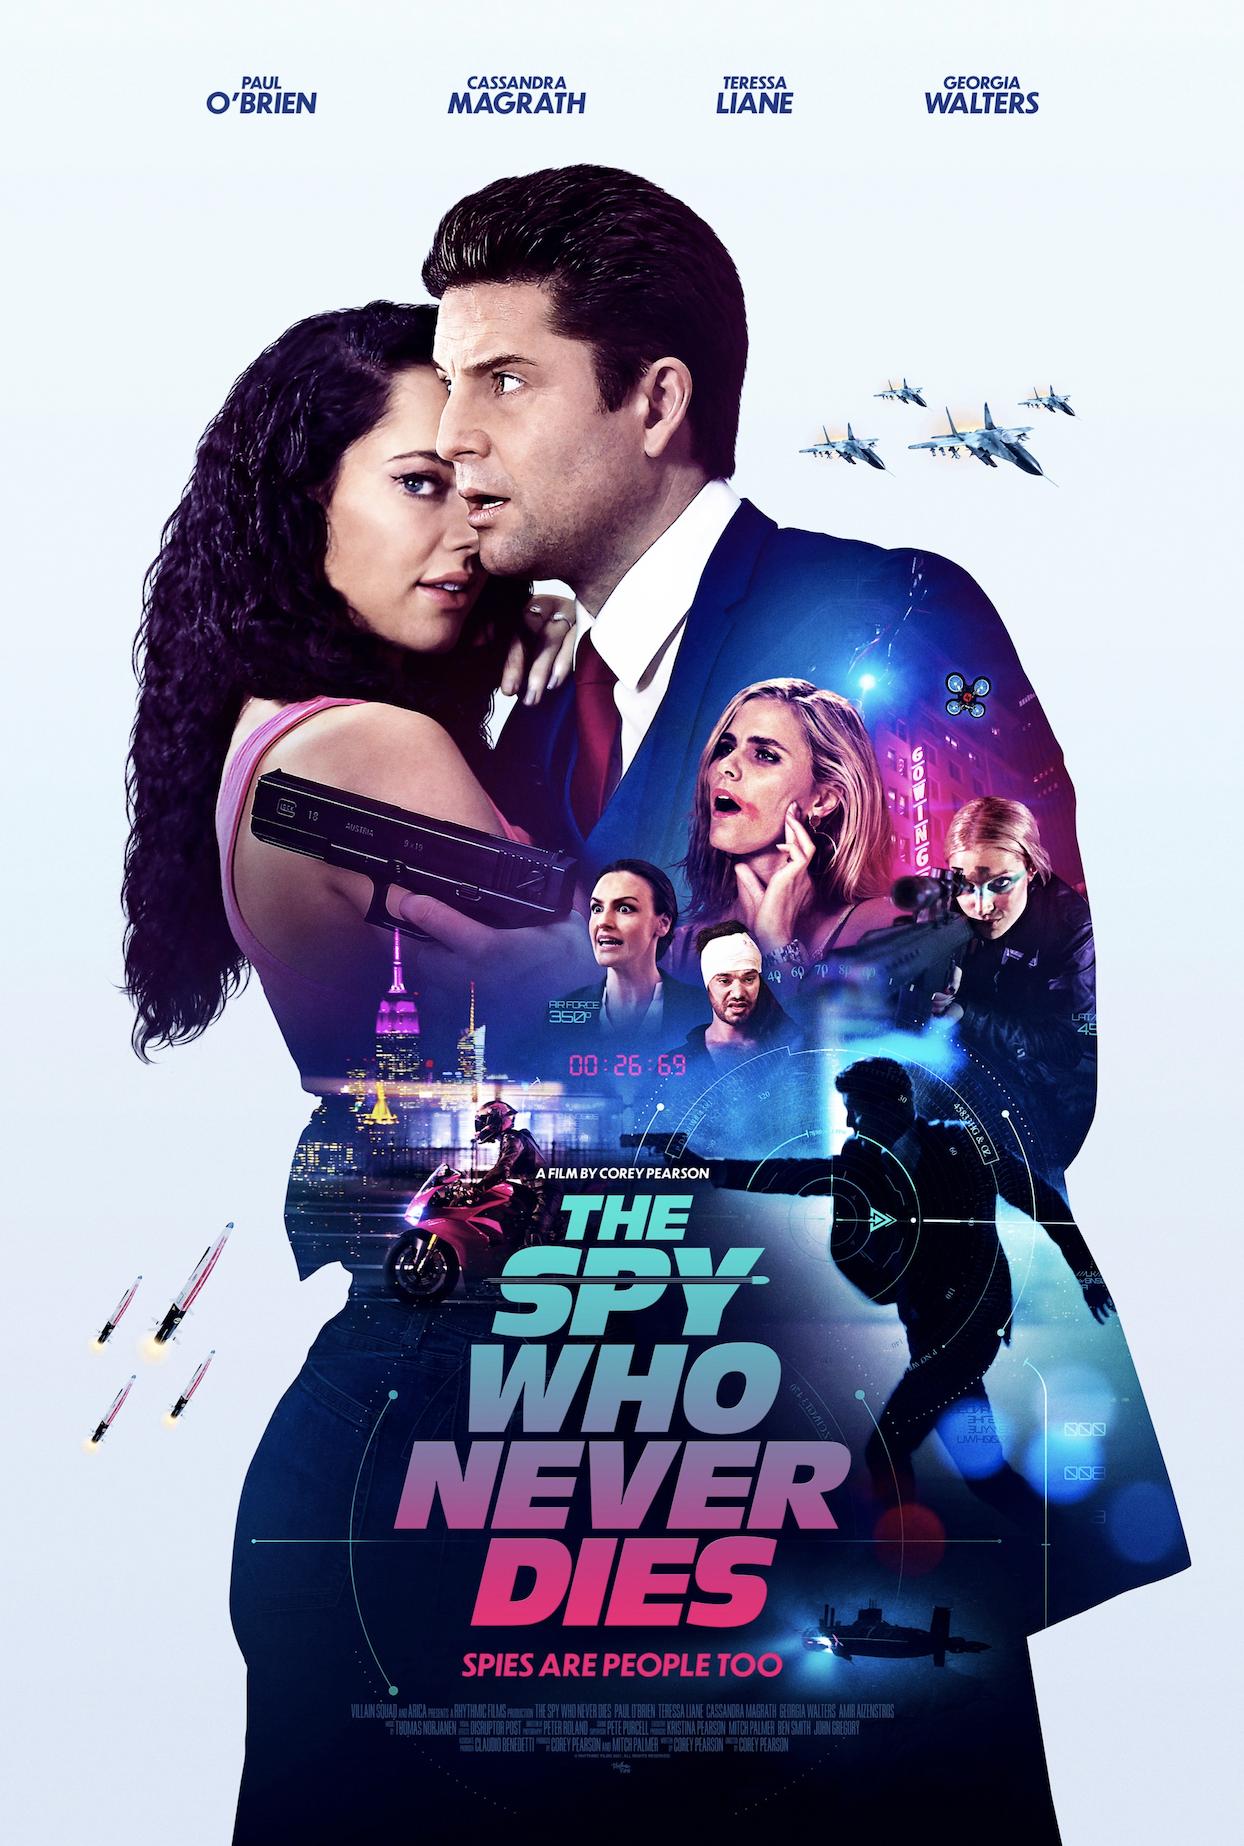 The Spy Who Never Dies 2022 English 720p HDRip ESub 800MB Download